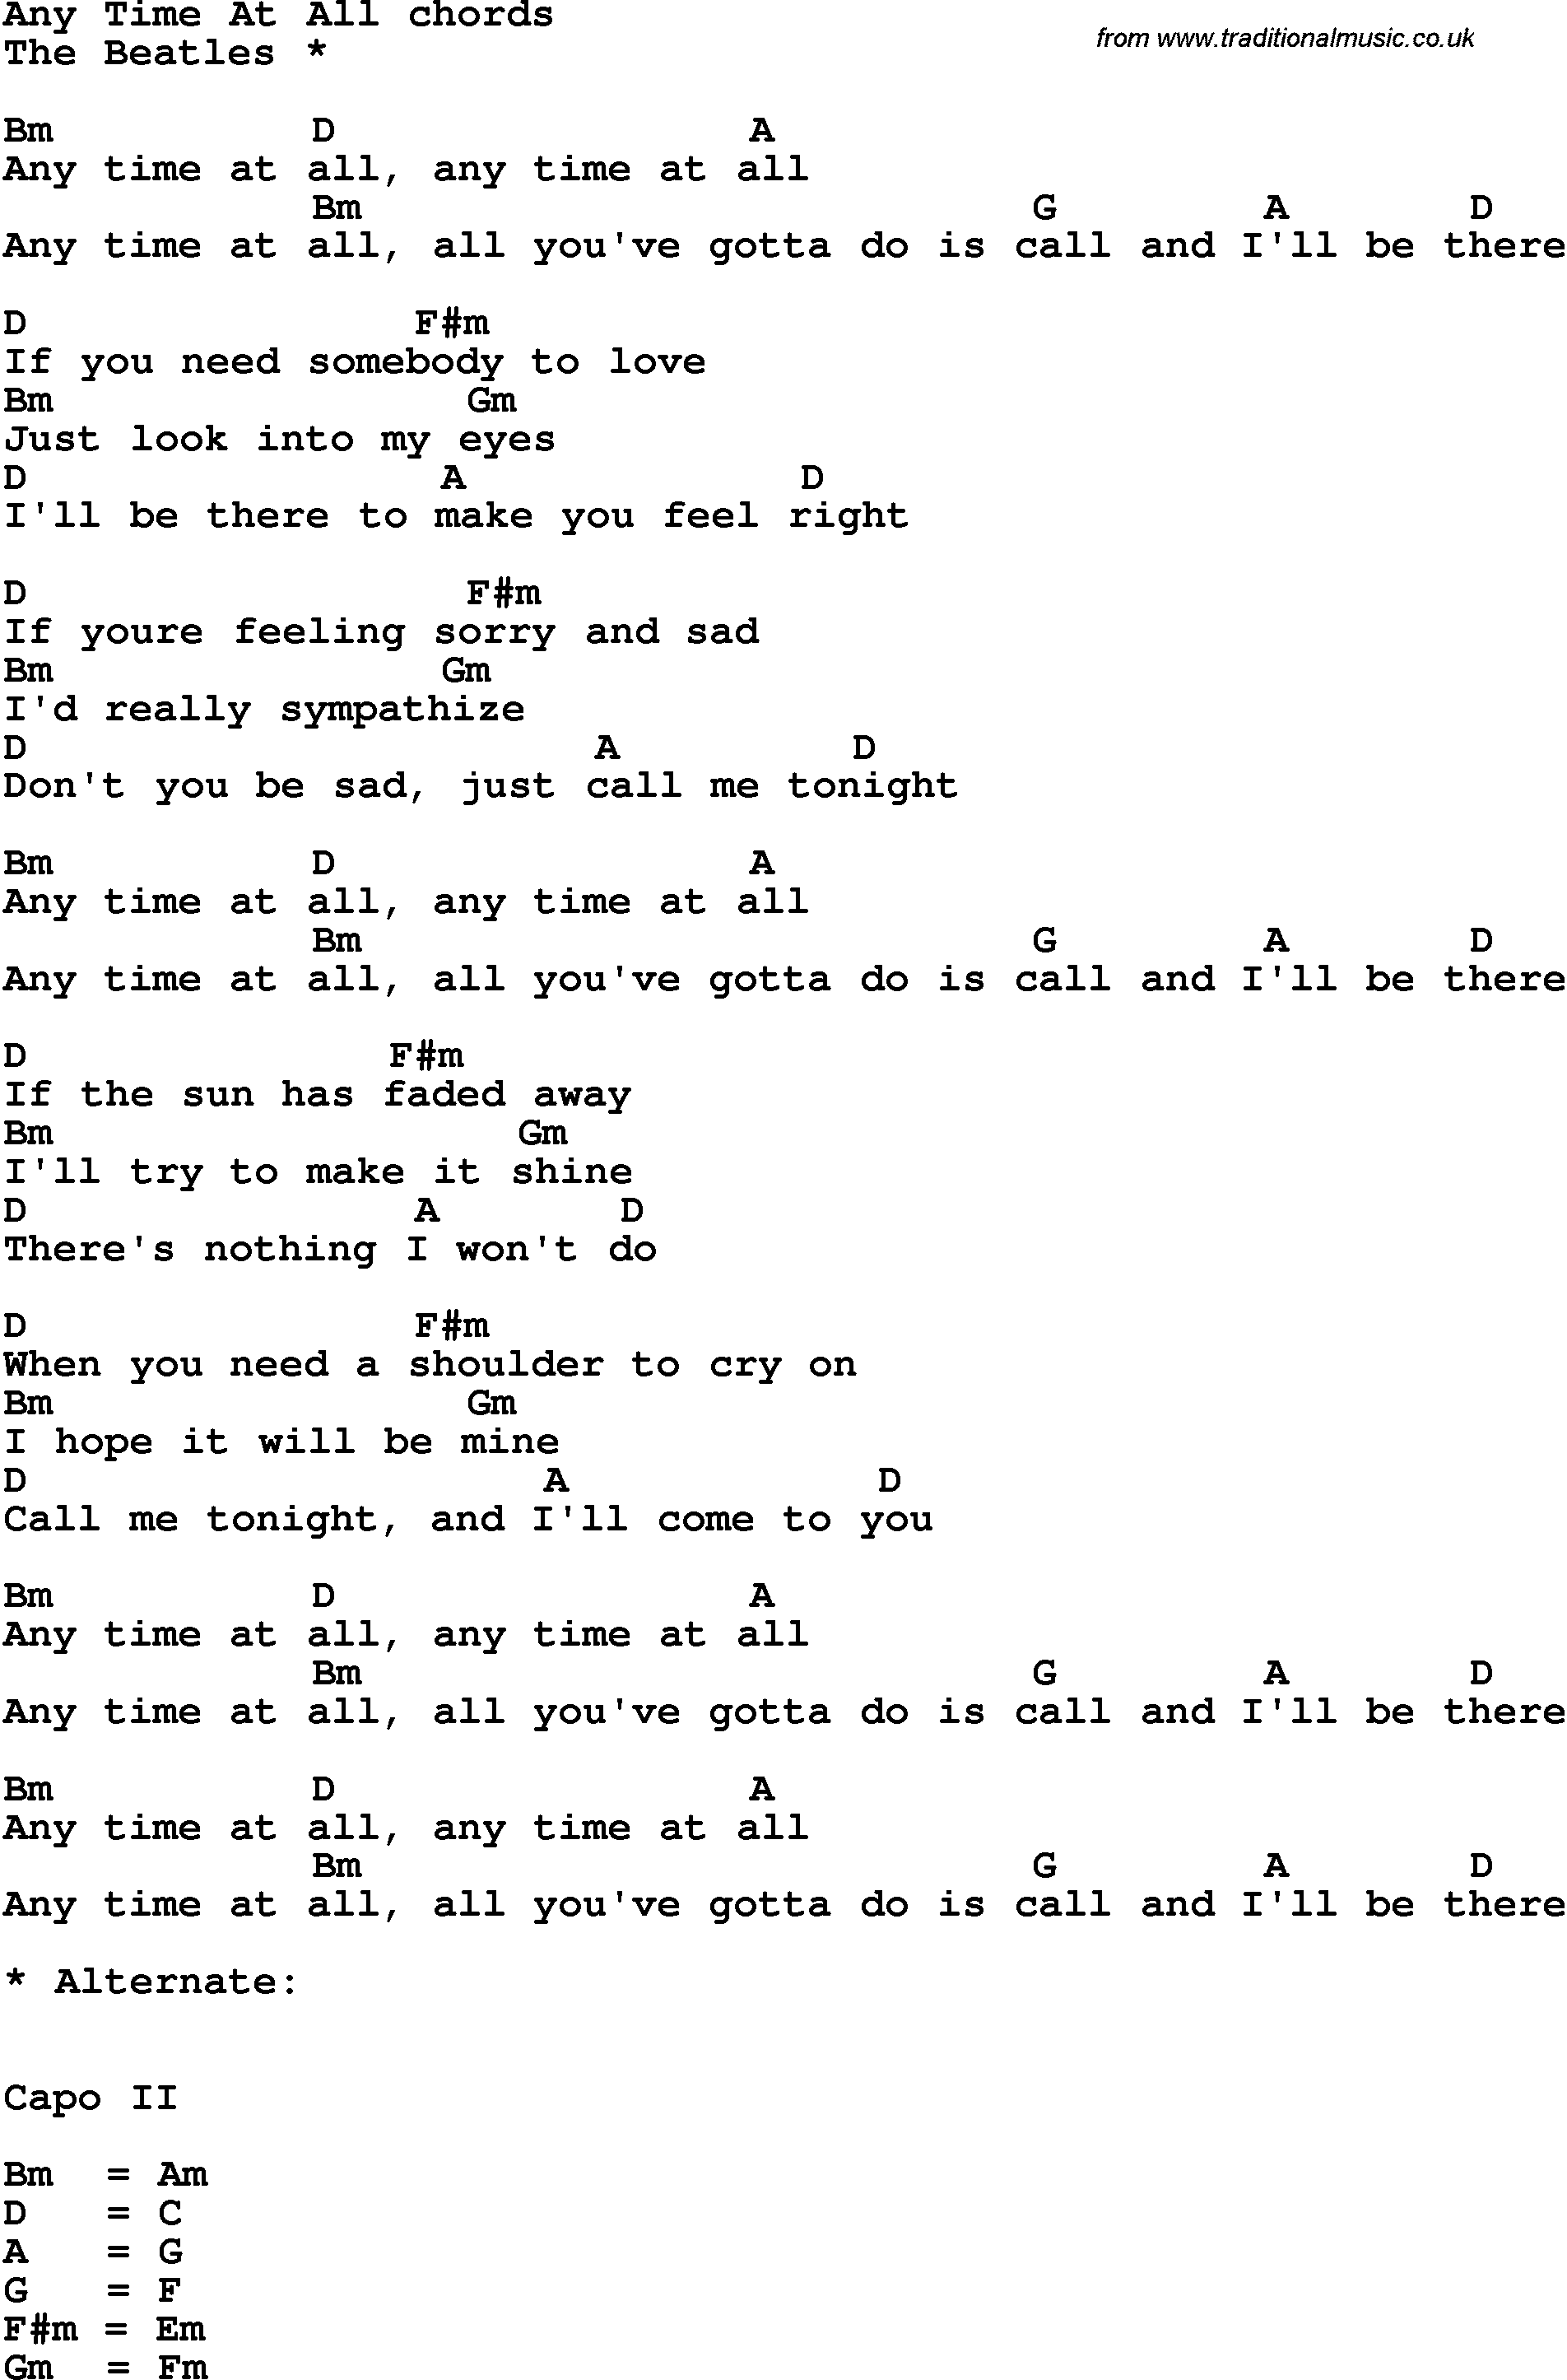 Song Lyrics with guitar chords for Any Time At All - The Beatles2